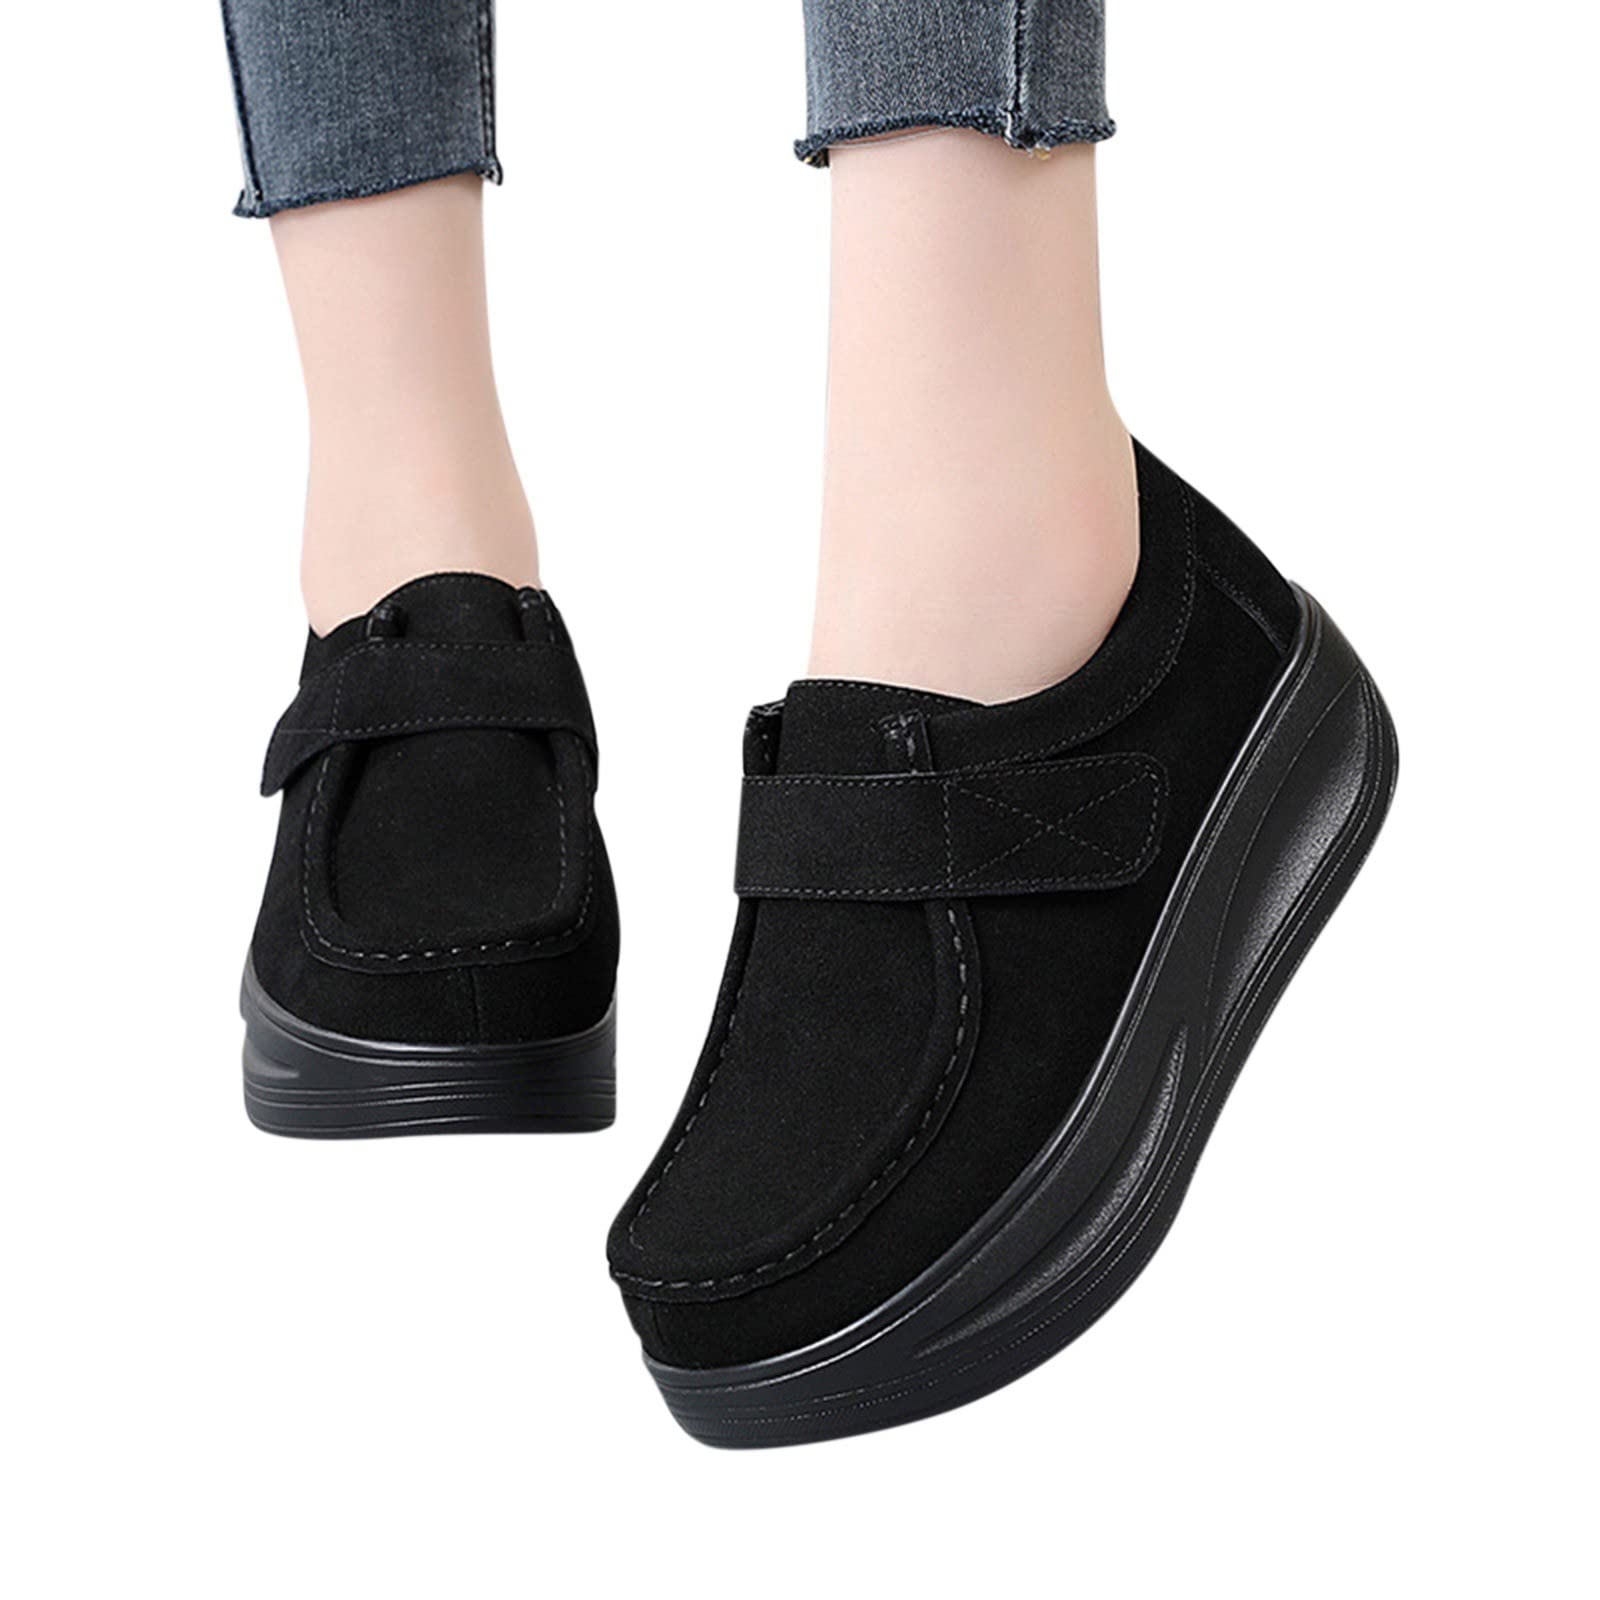 Women Slip-on Dance Sneakers Wedge Platform Loafers Fashion Air